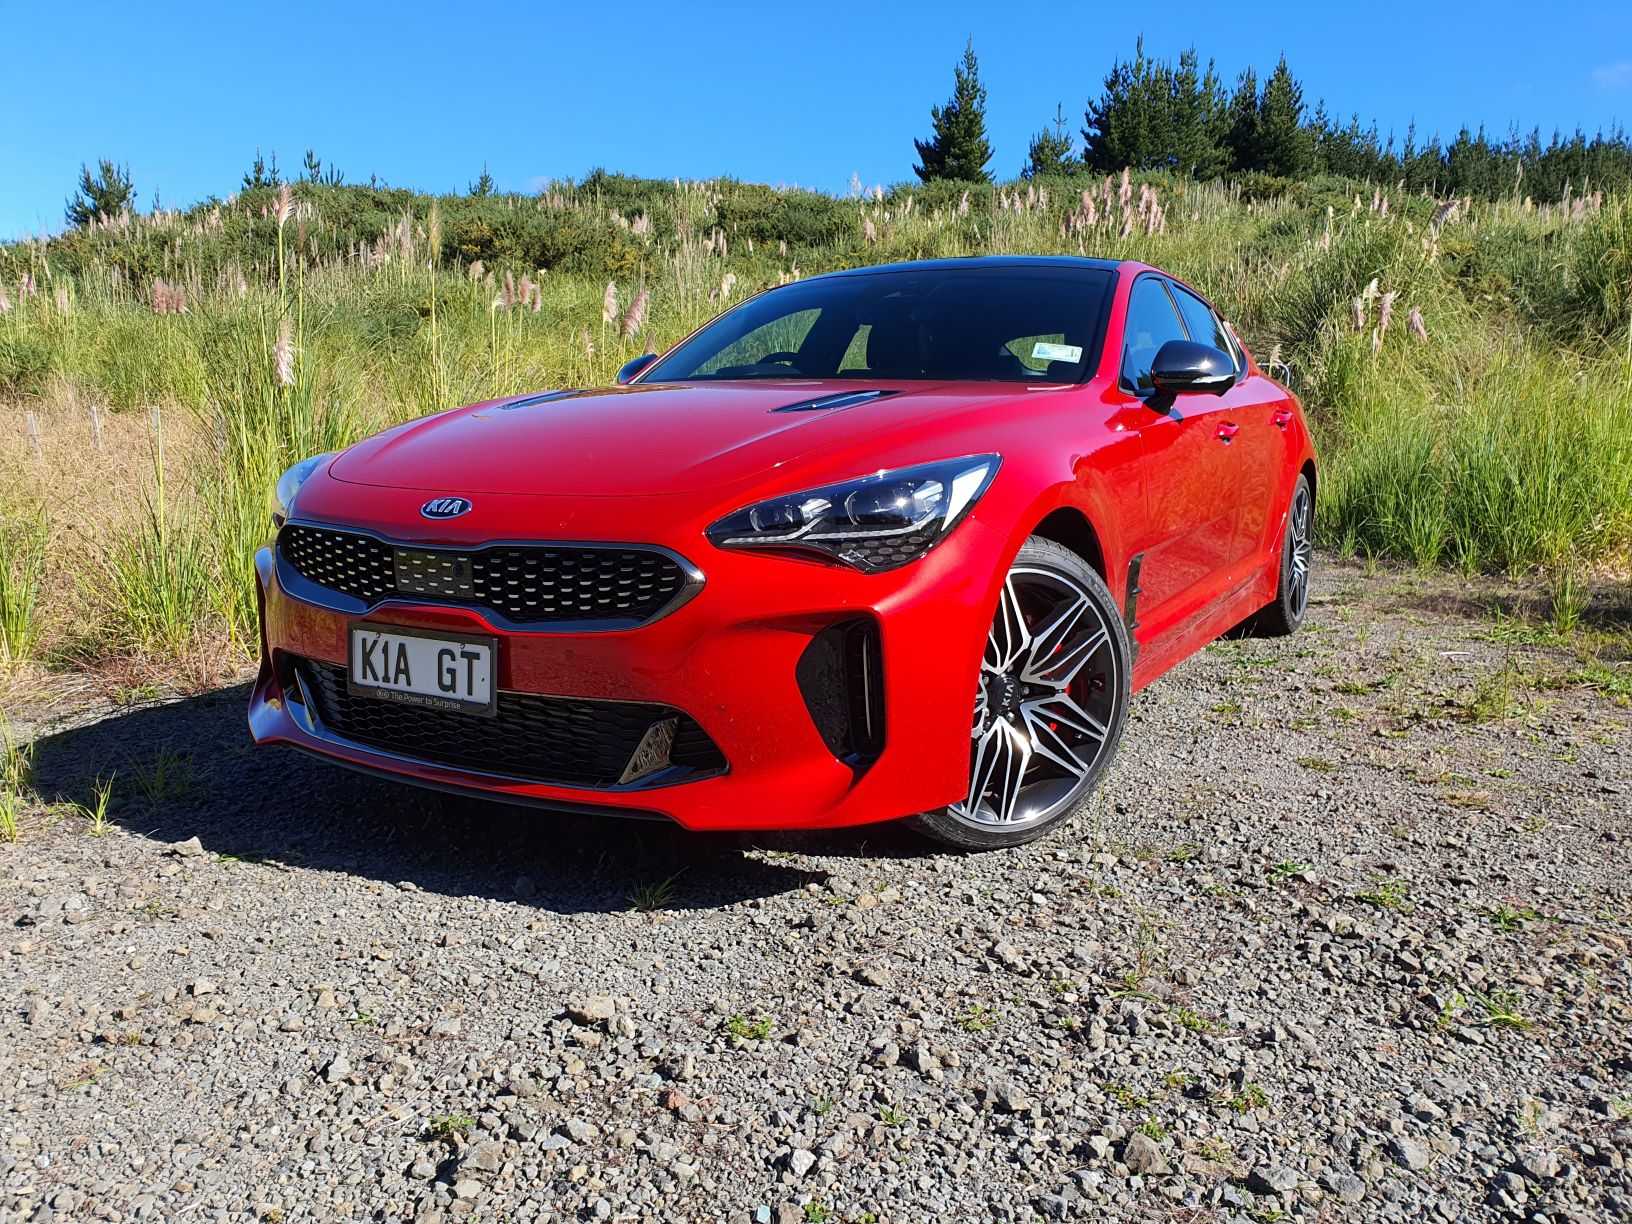 Front view of the new Kia Stinger GT